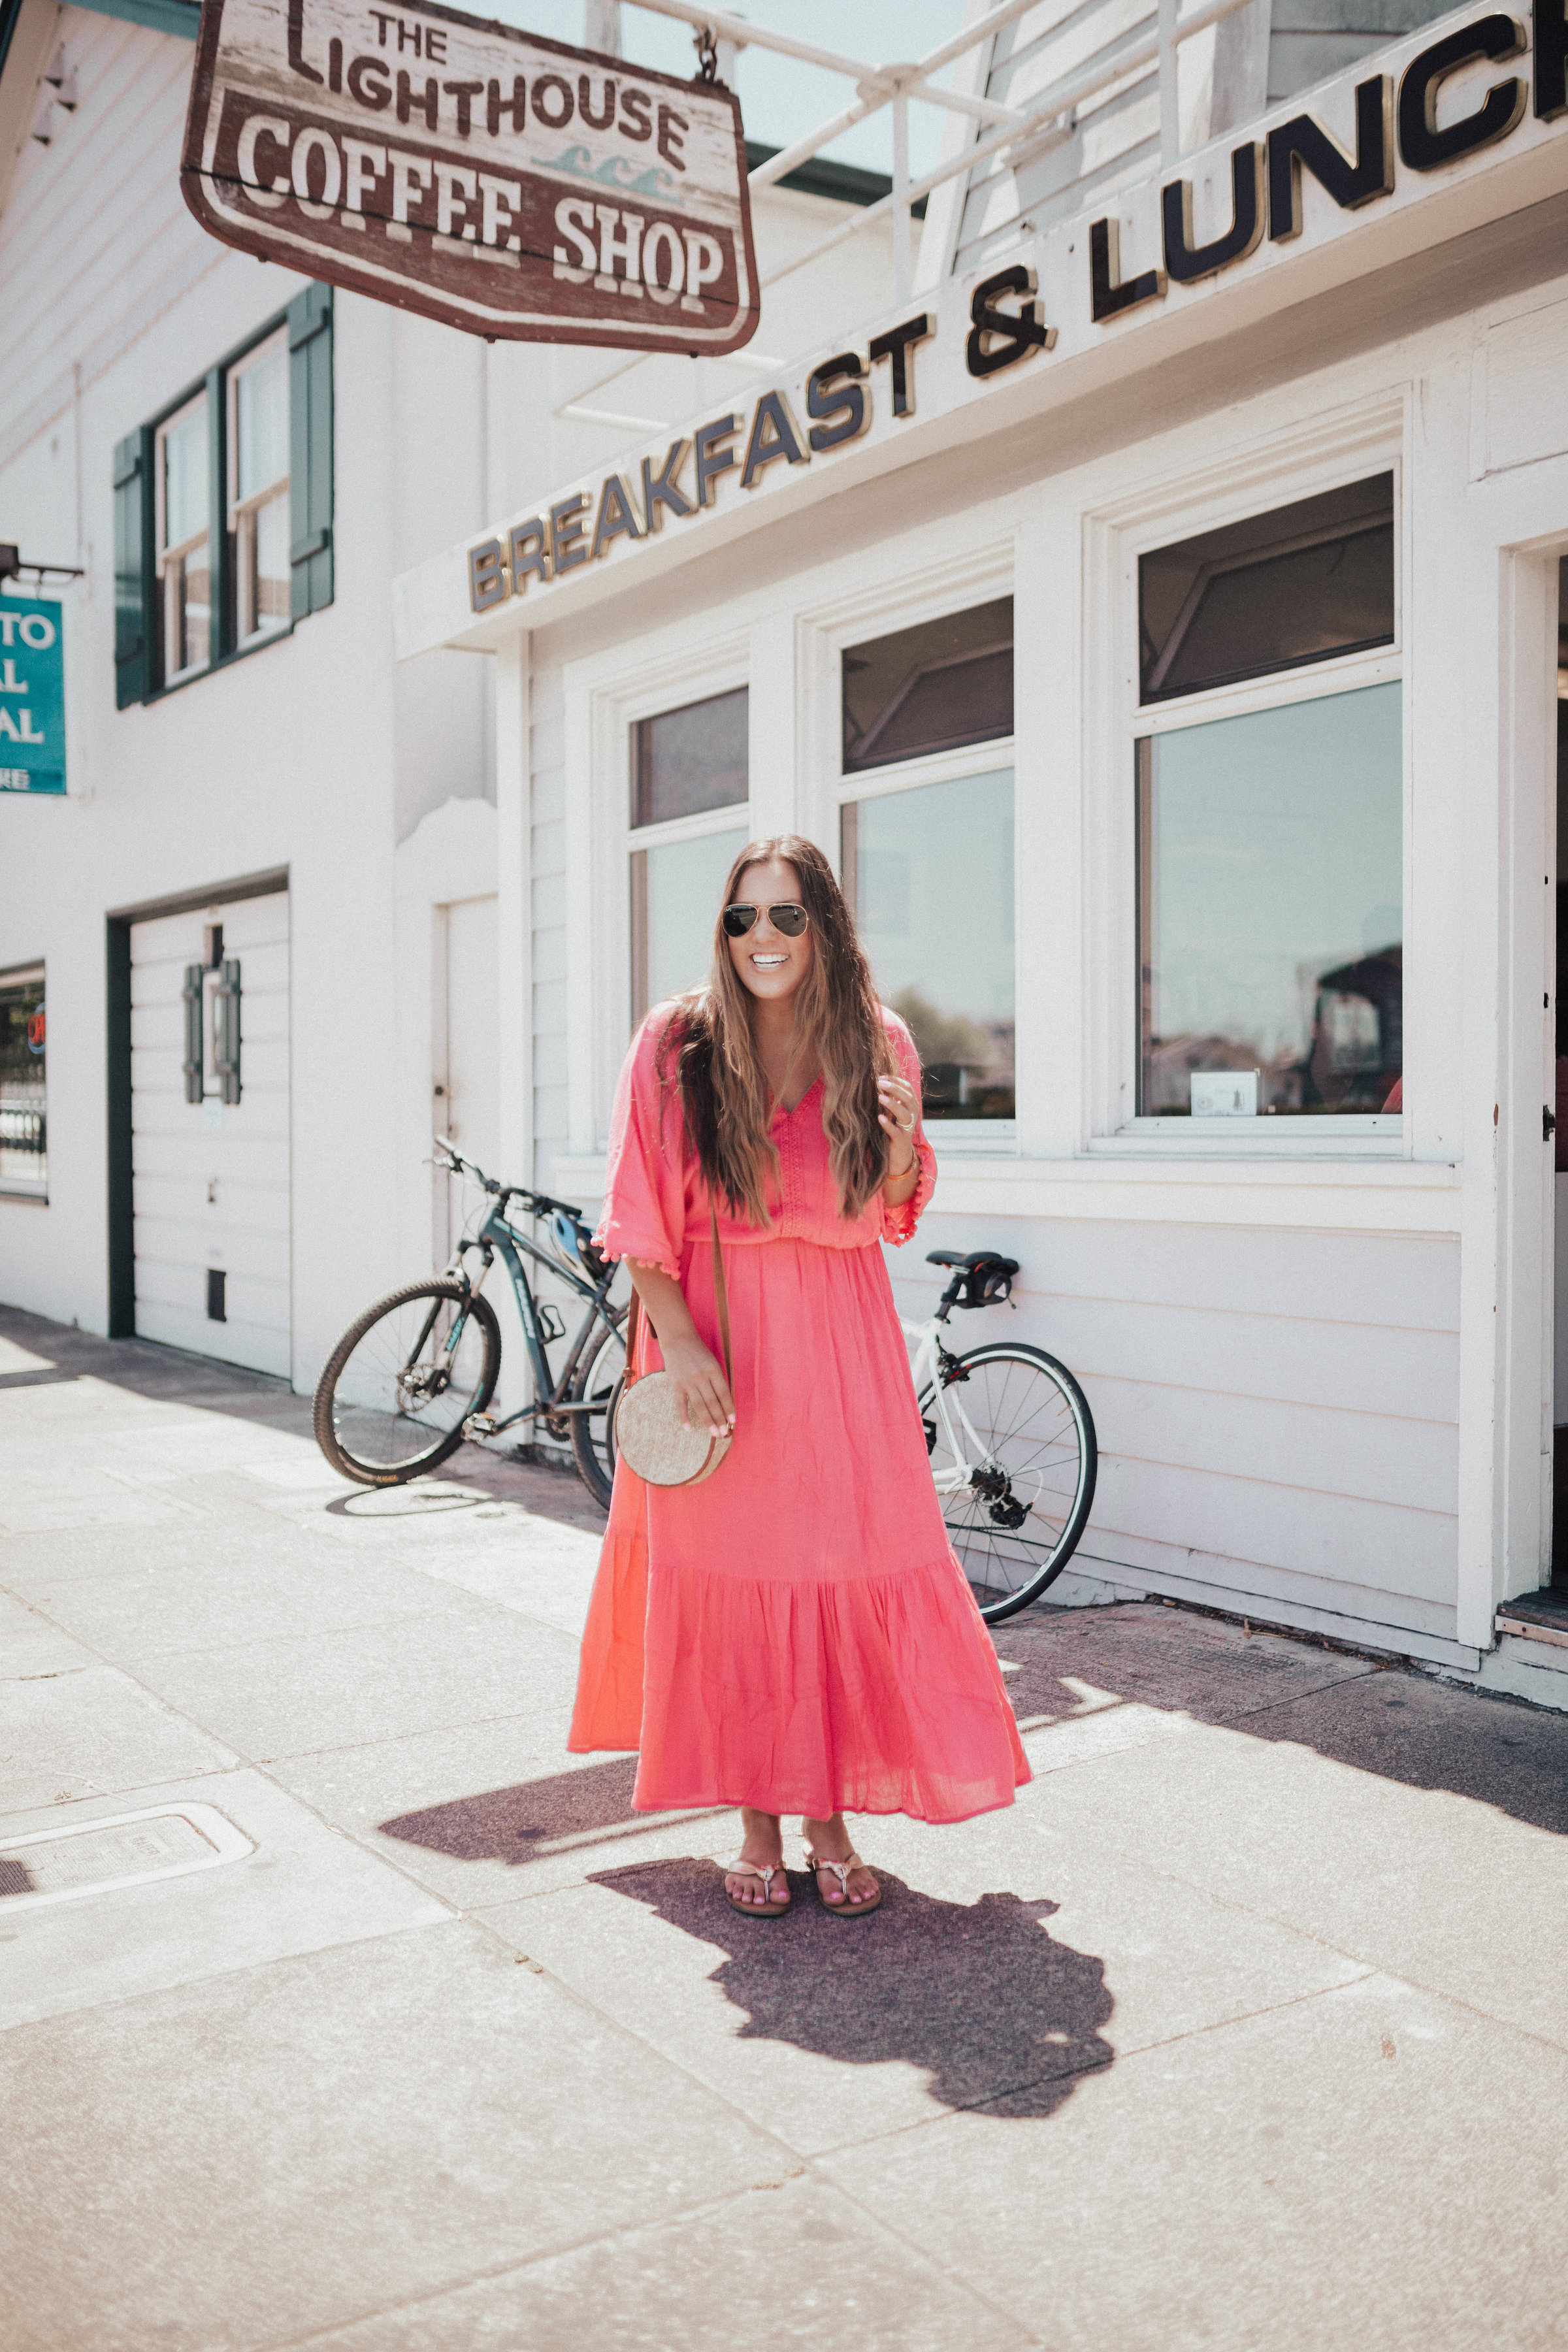 Ashley Zeal from Two Peas in a Prada shares her favorite dresses from her Simply Be Summer Lookbook. Simply Be is a size inclusive brand that ranges from 8-28.